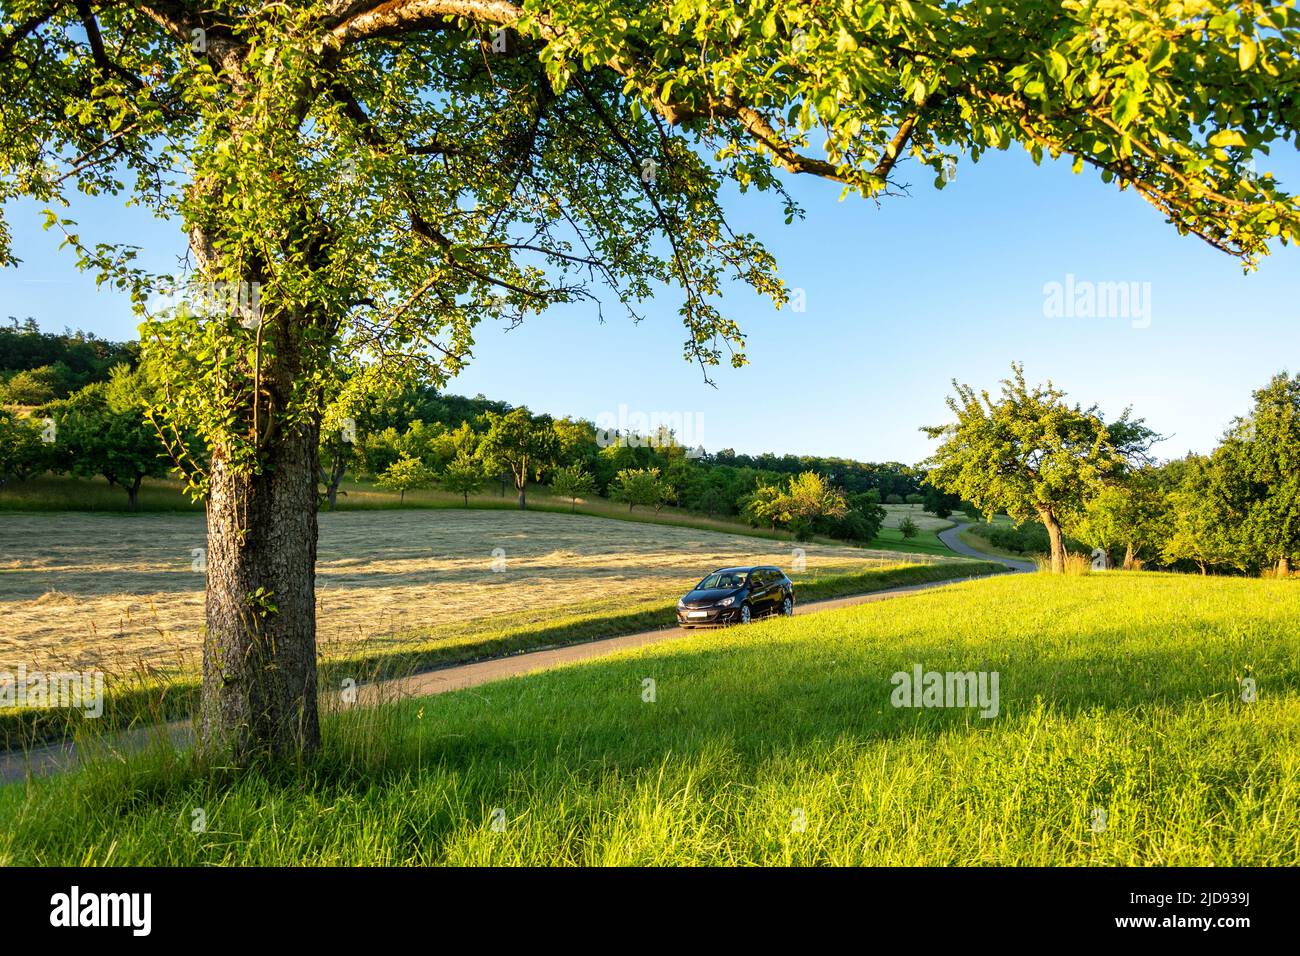 Car on a country road in beautiful green summer landscape at sunset Stock Photo